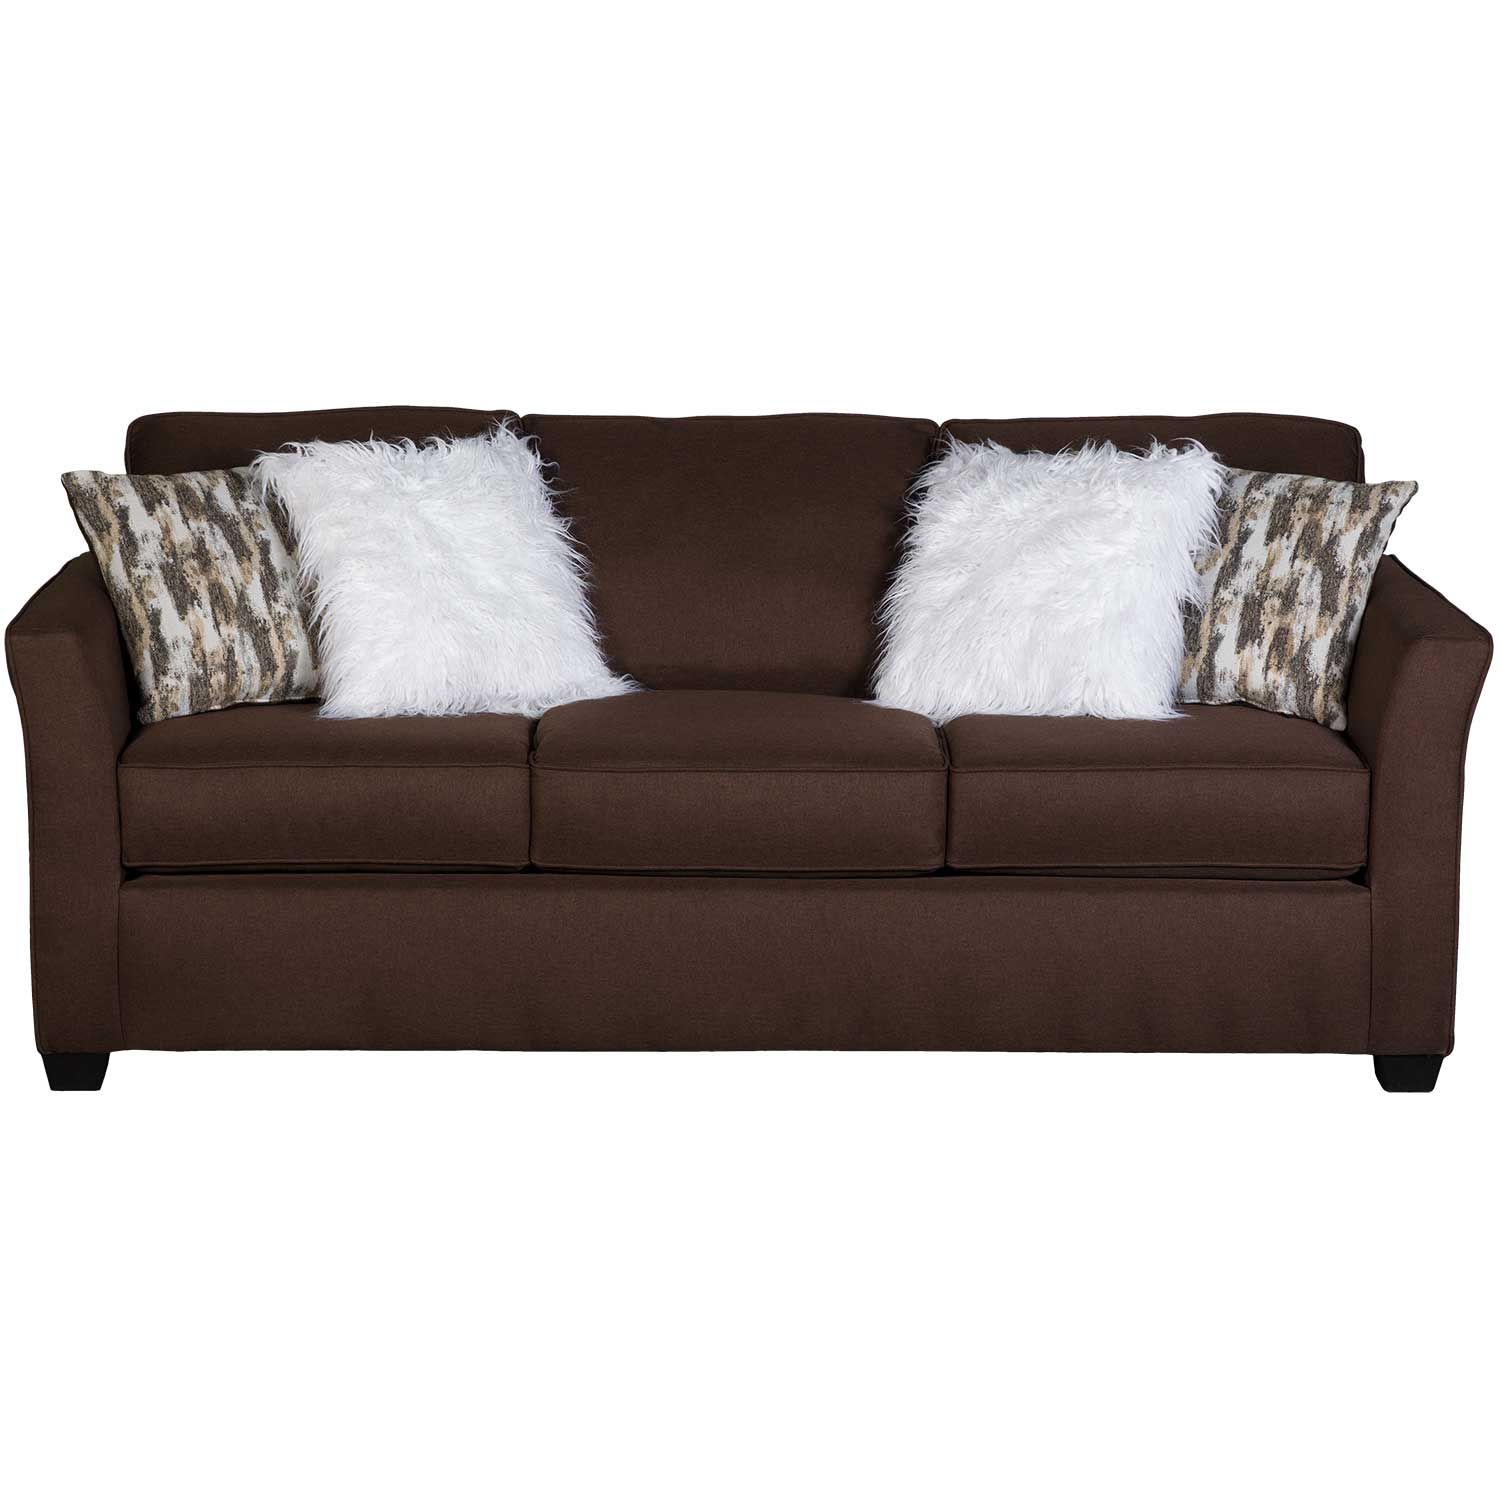 Keegan Chocolate Brown Sofa | Z 1003 | Afw For Sofas In Chocolate Brown (View 4 of 15)